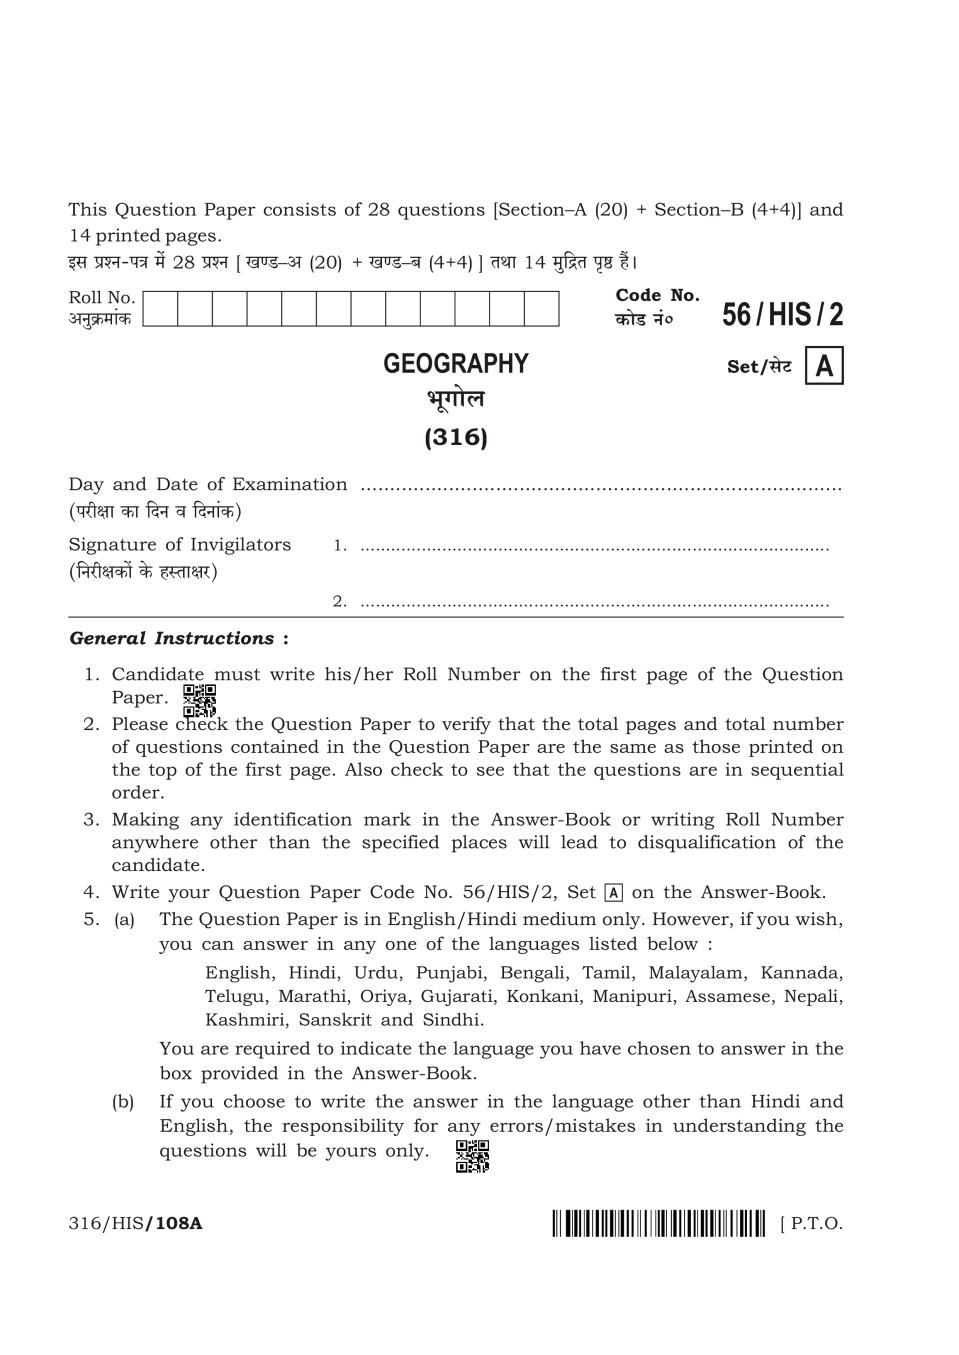 NIOS Class 12 Question Paper Apr 2018 - Geography - Page 1